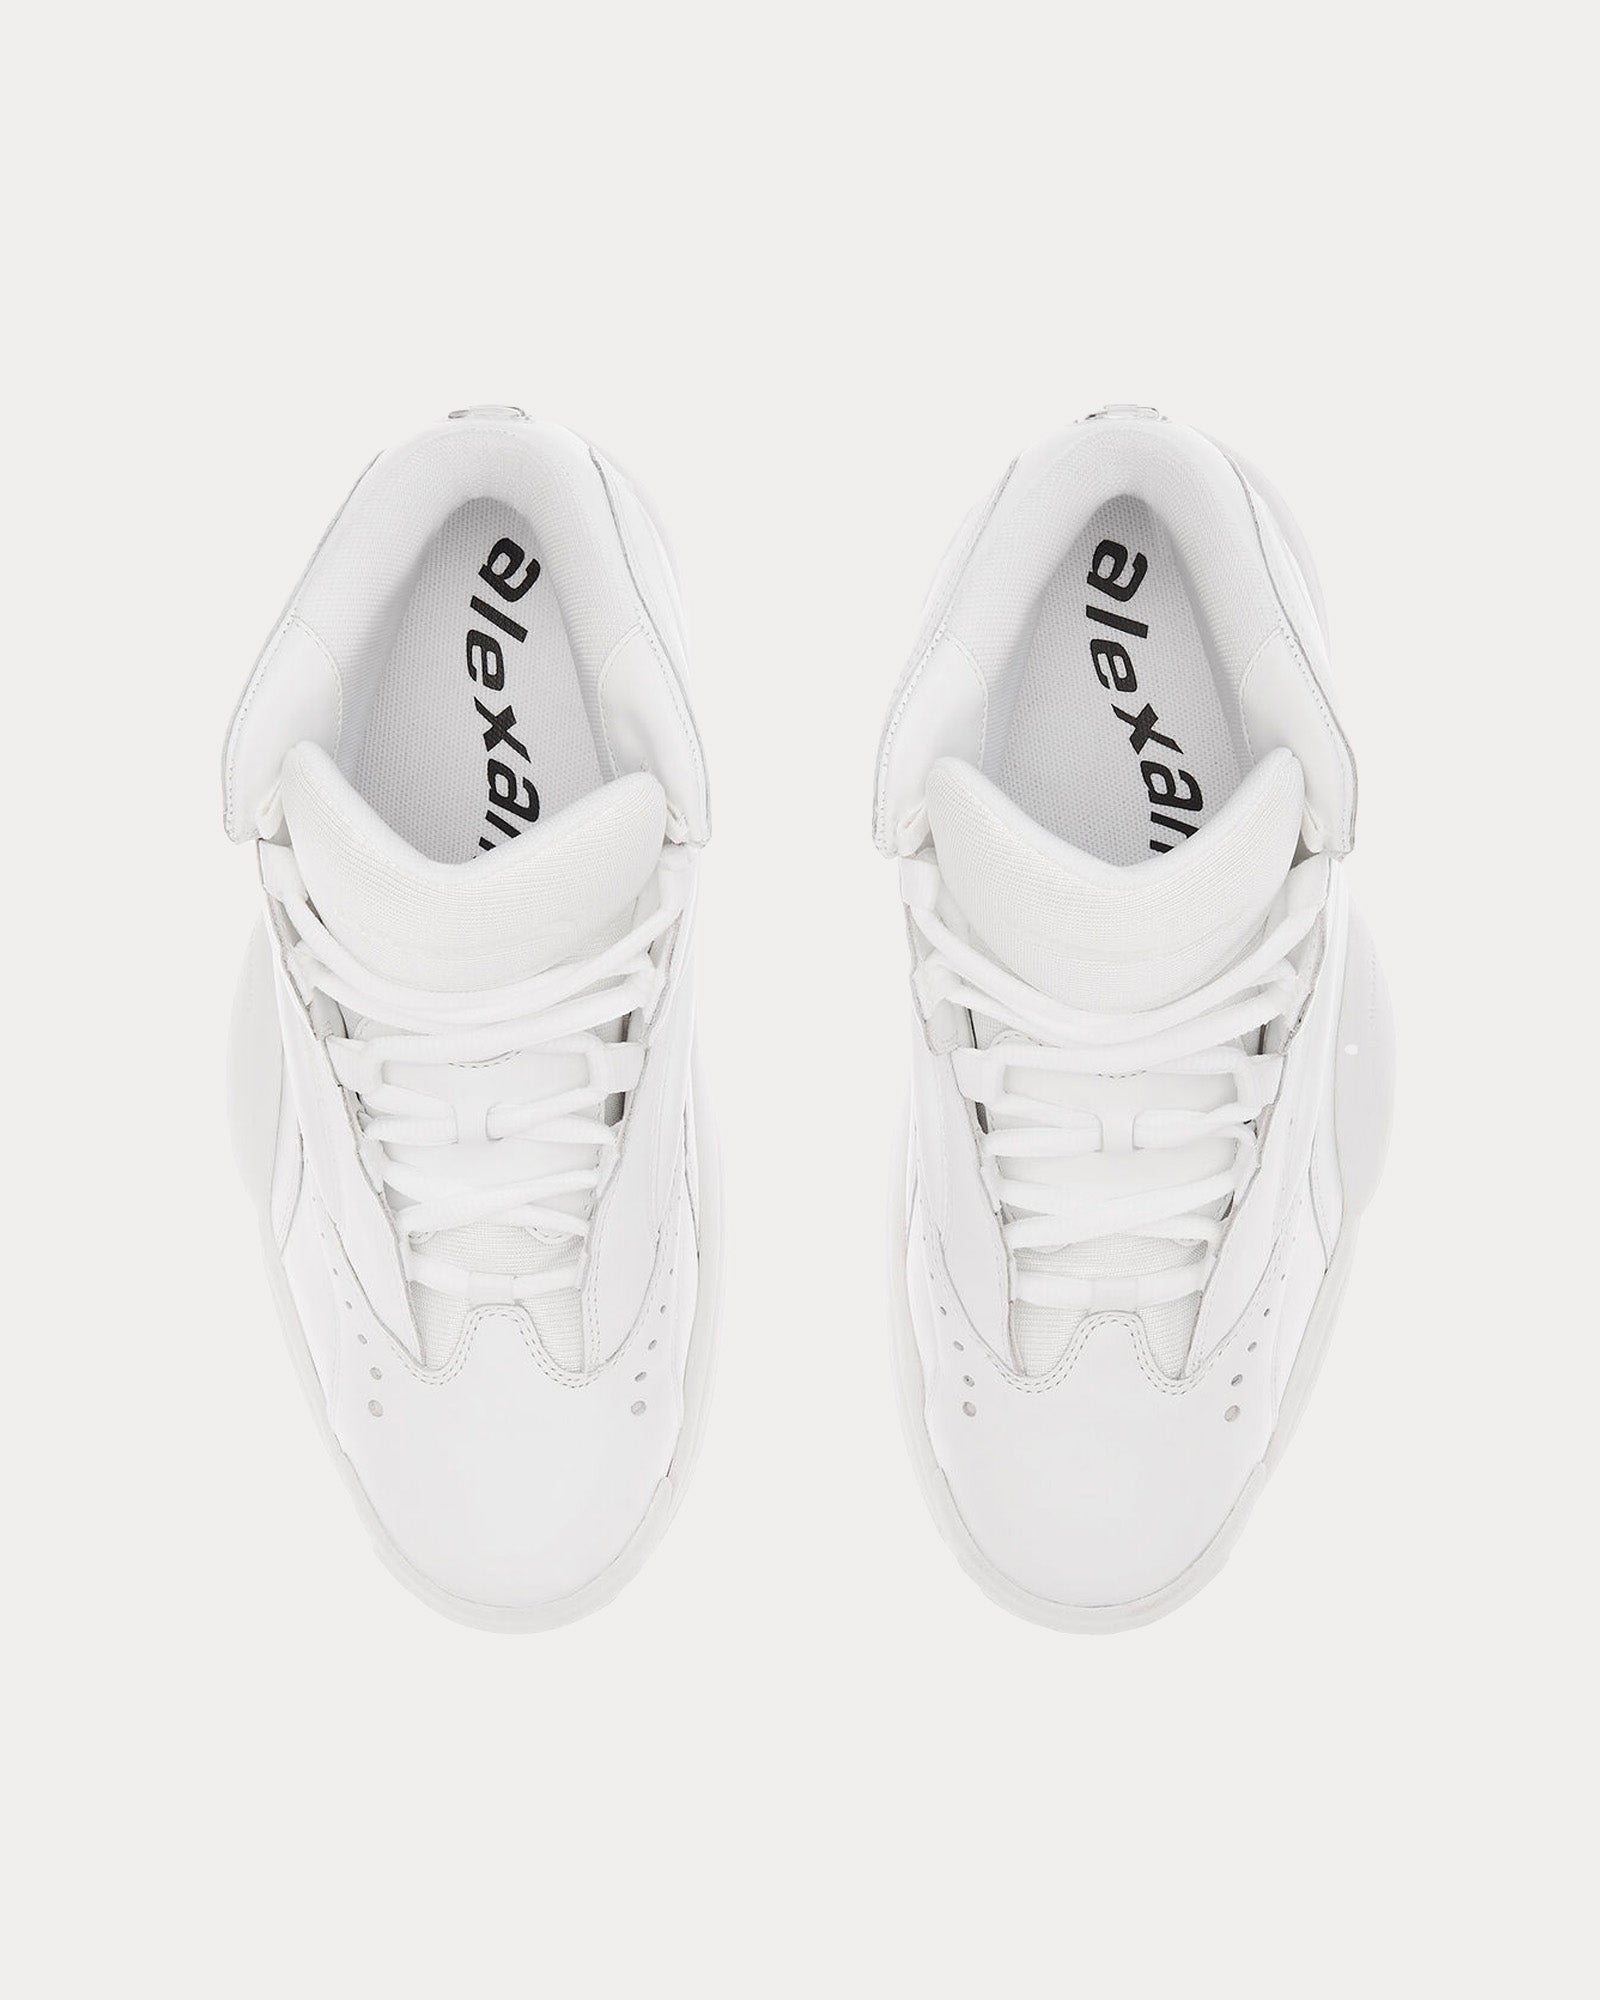 Alexander Wang - AW Hoop Leather White High Top Sneakers